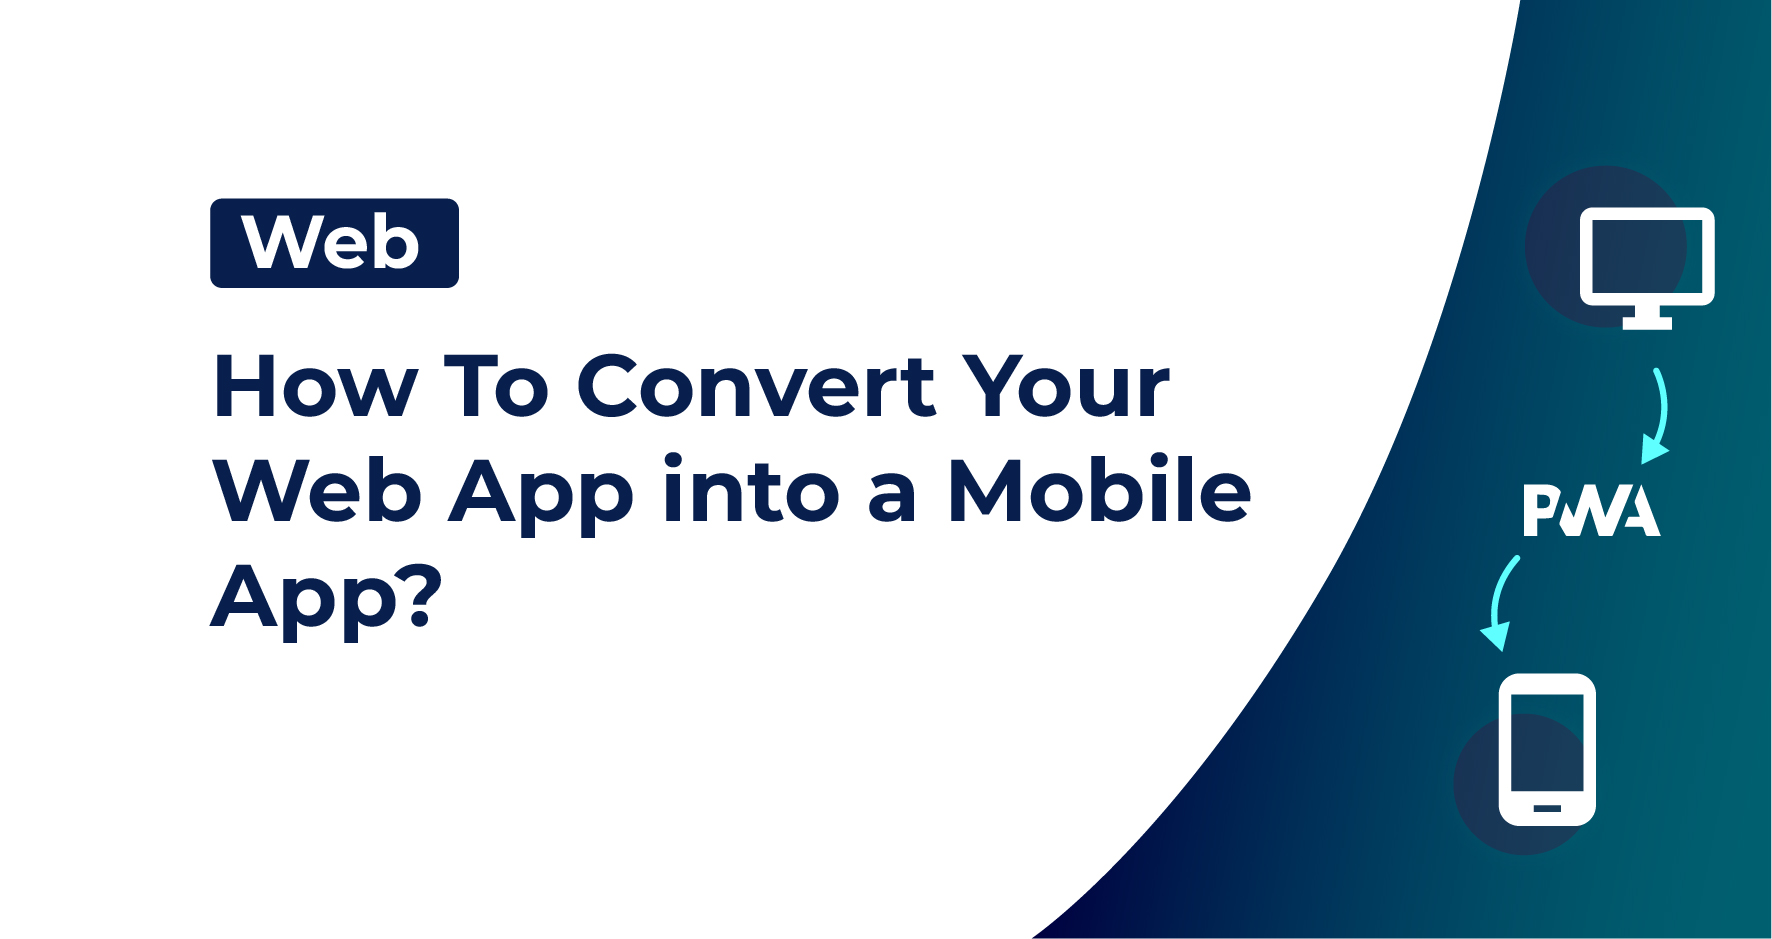 How To Convert Your Web App into a Mobile App?